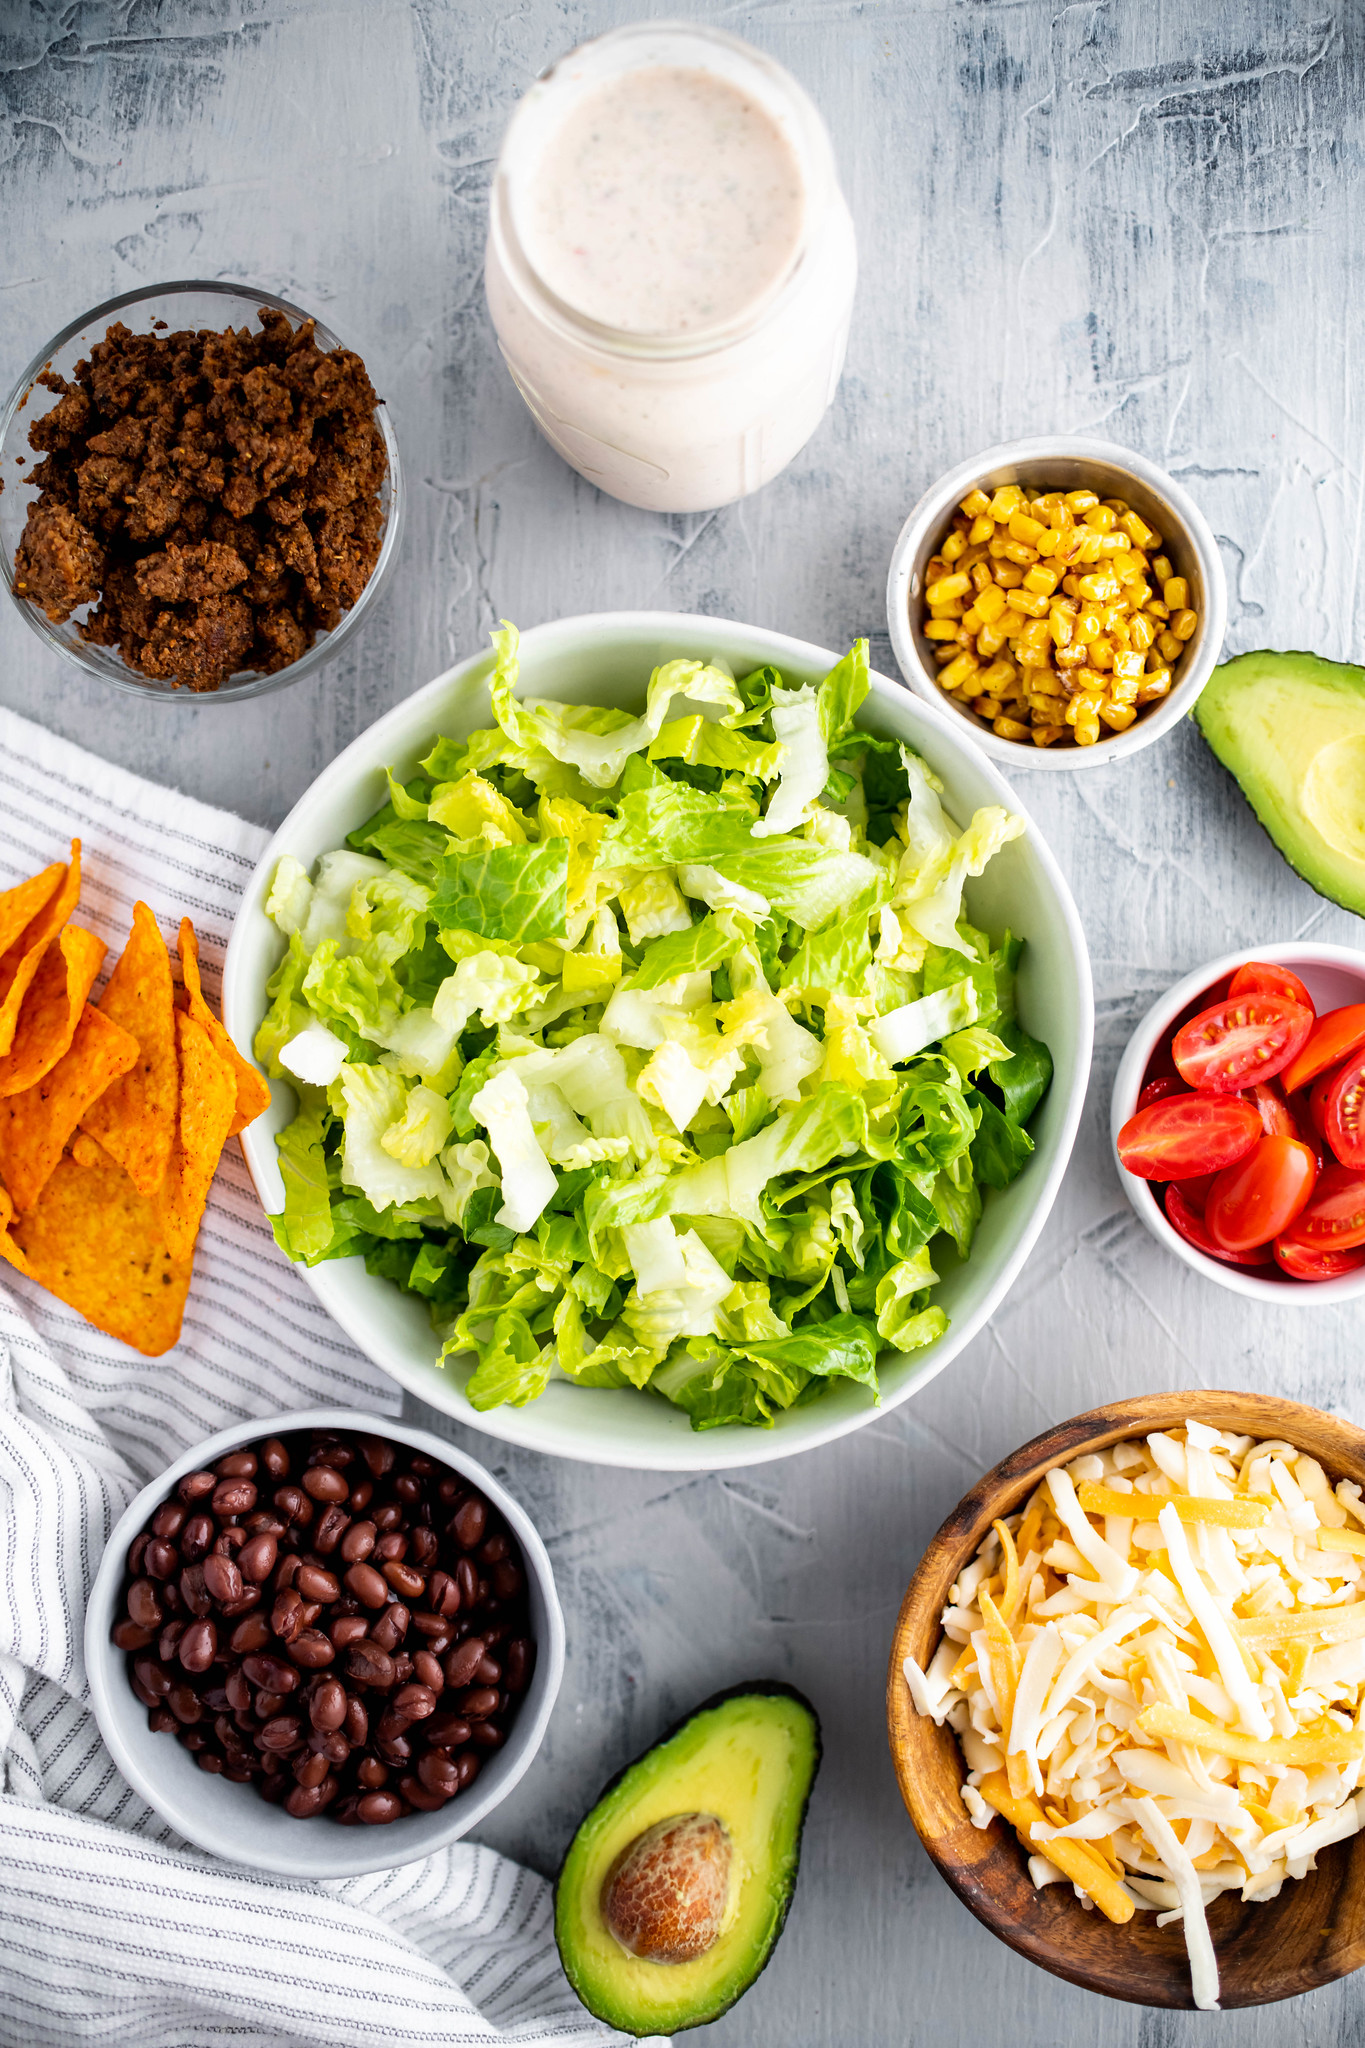 Large bowl of chopped romaine lettuce in the center. Surrounded by bowls of corn, shredded cheese, sliced grape tomatoes, corn, black beans and ground beef.